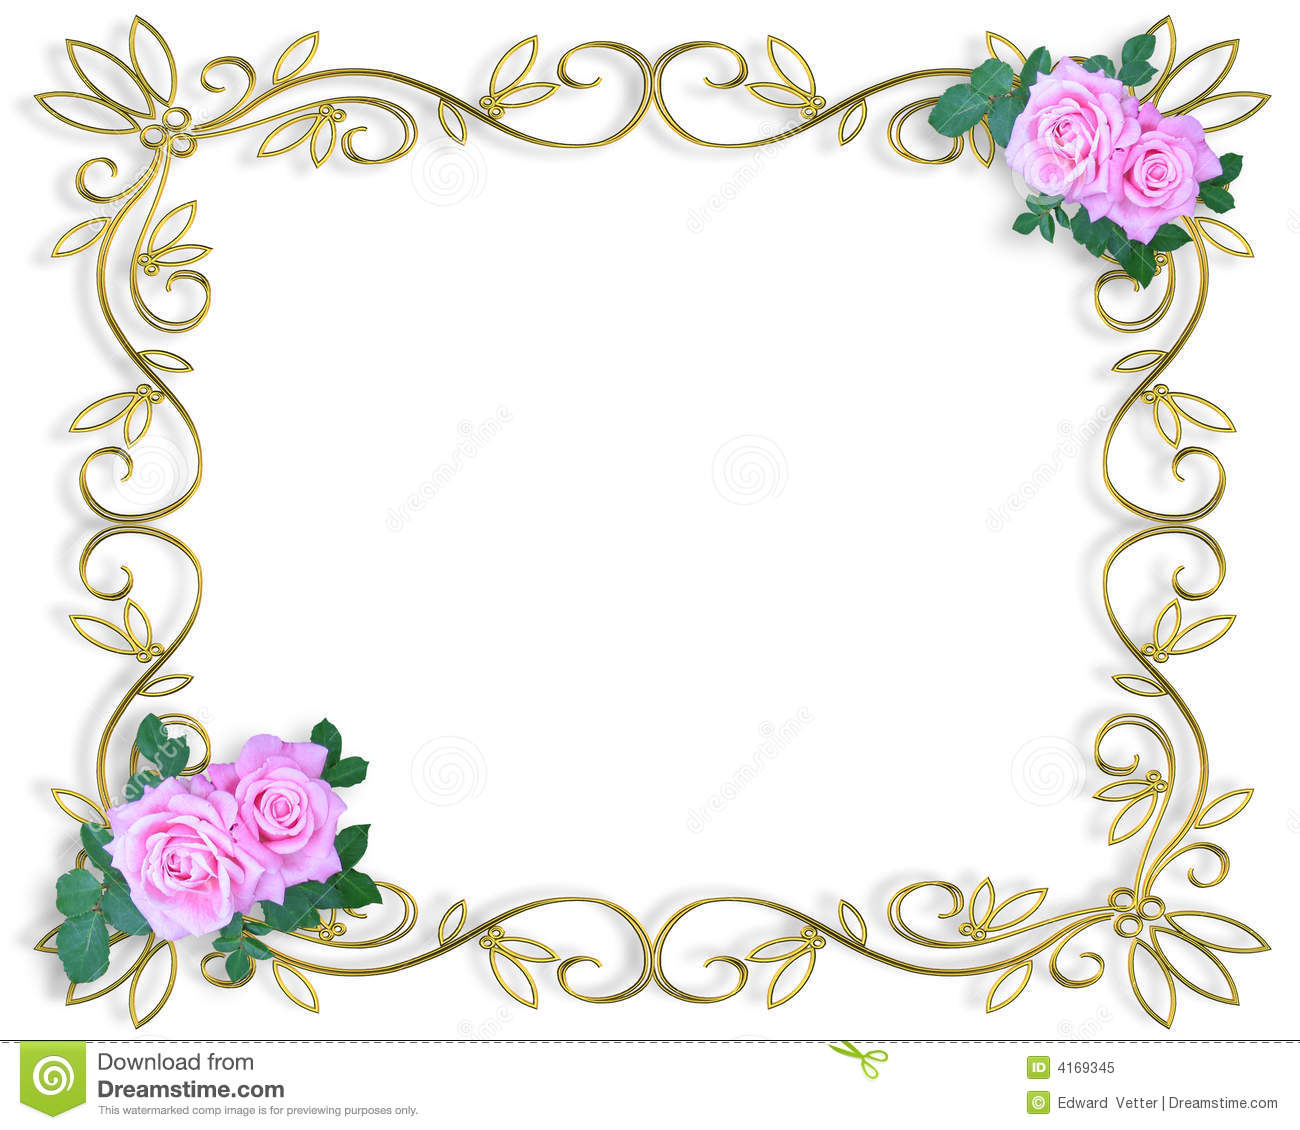 free clipart for wedding invitations - photo #38